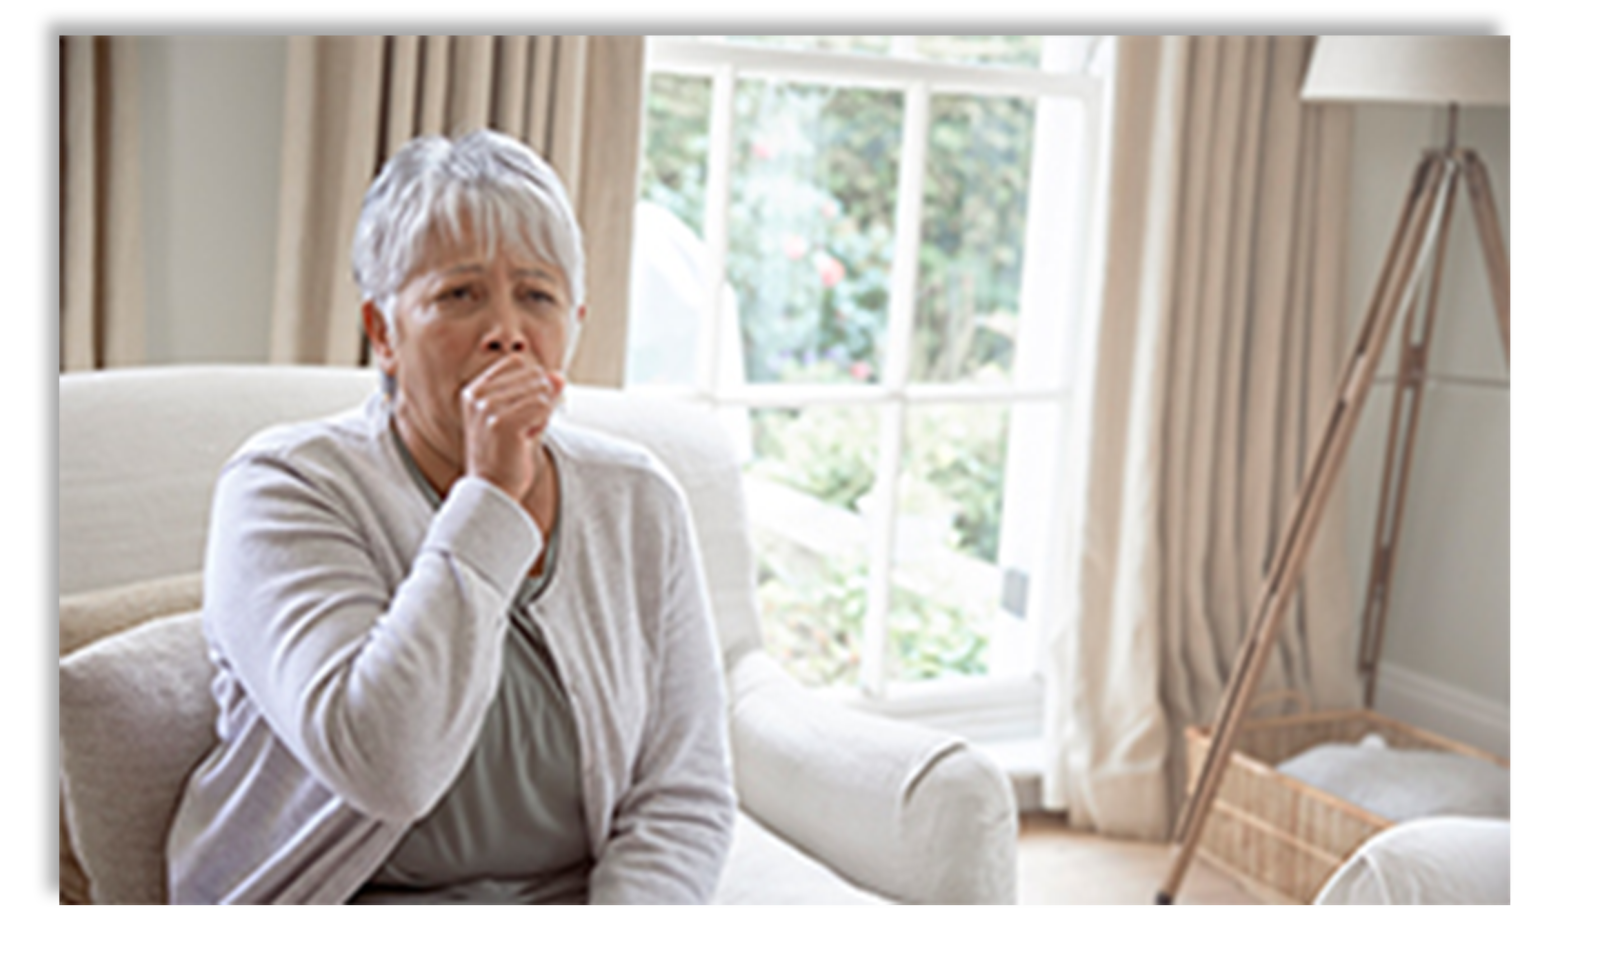 Effects of chronic cough on urinary incontinence by Anne Yates